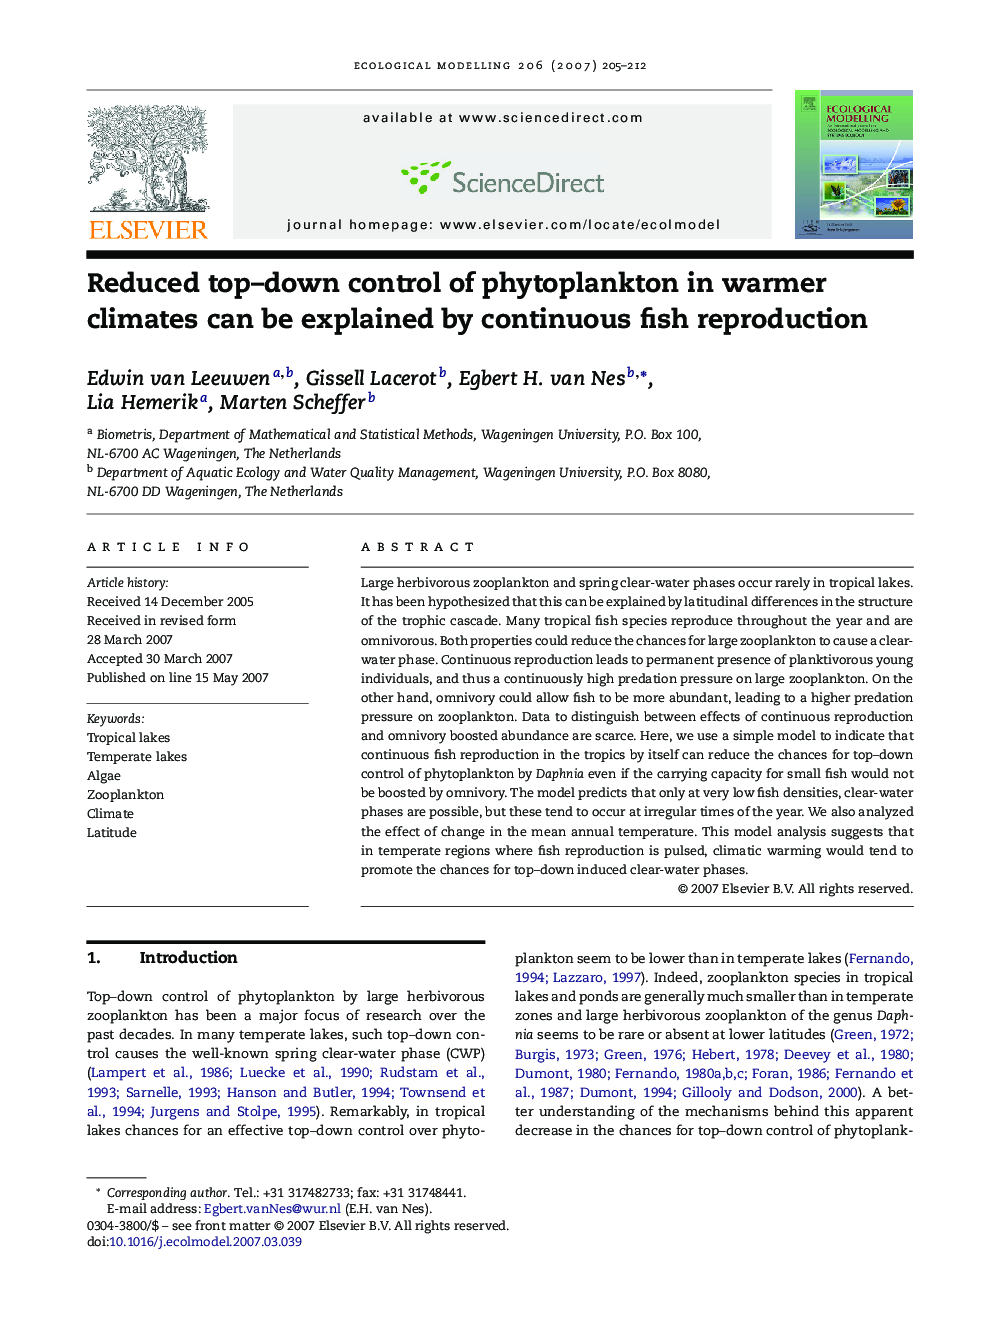 Reduced top–down control of phytoplankton in warmer climates can be explained by continuous fish reproduction